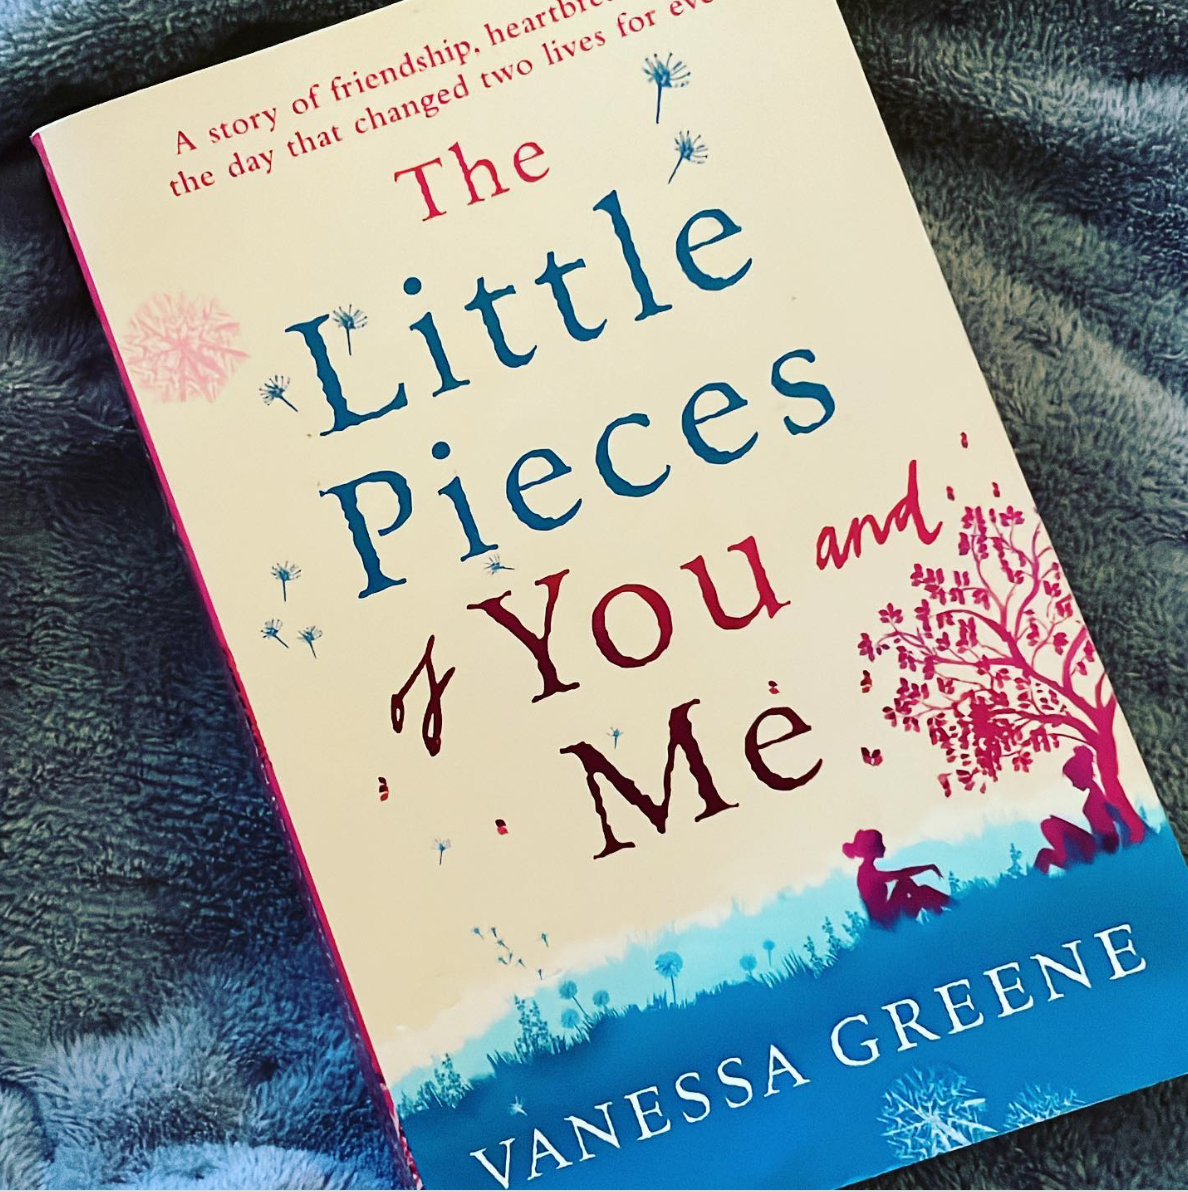 Novel about chronic Illness: The Little Pieces of You and Me by Vanessa Greene
